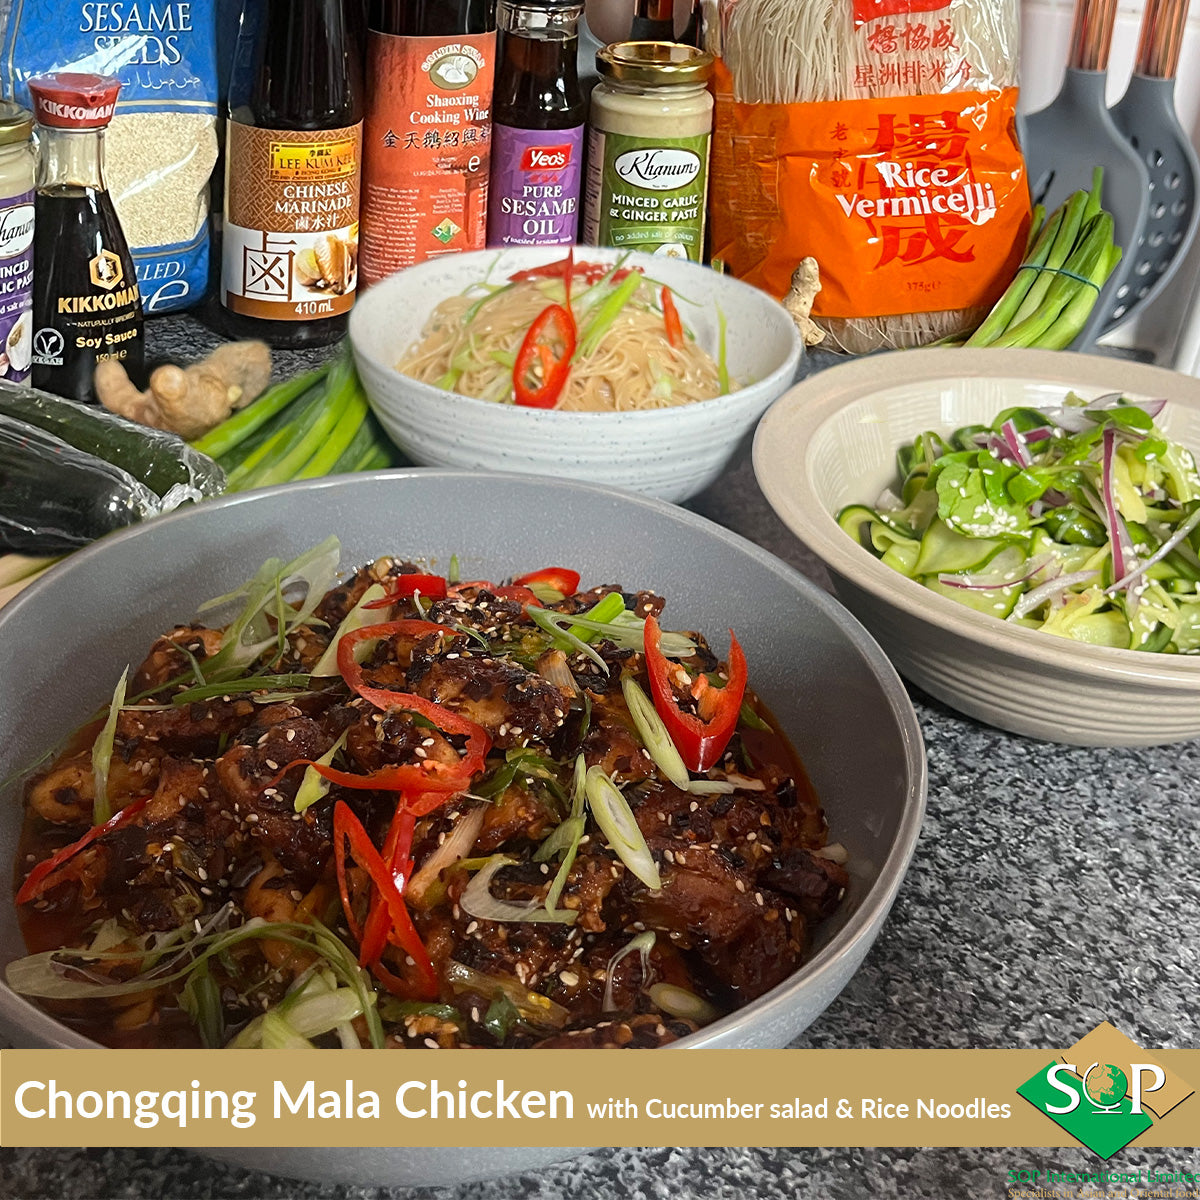 Chongqing Mala Chicken with Cucumber Salad and Rice Noodles